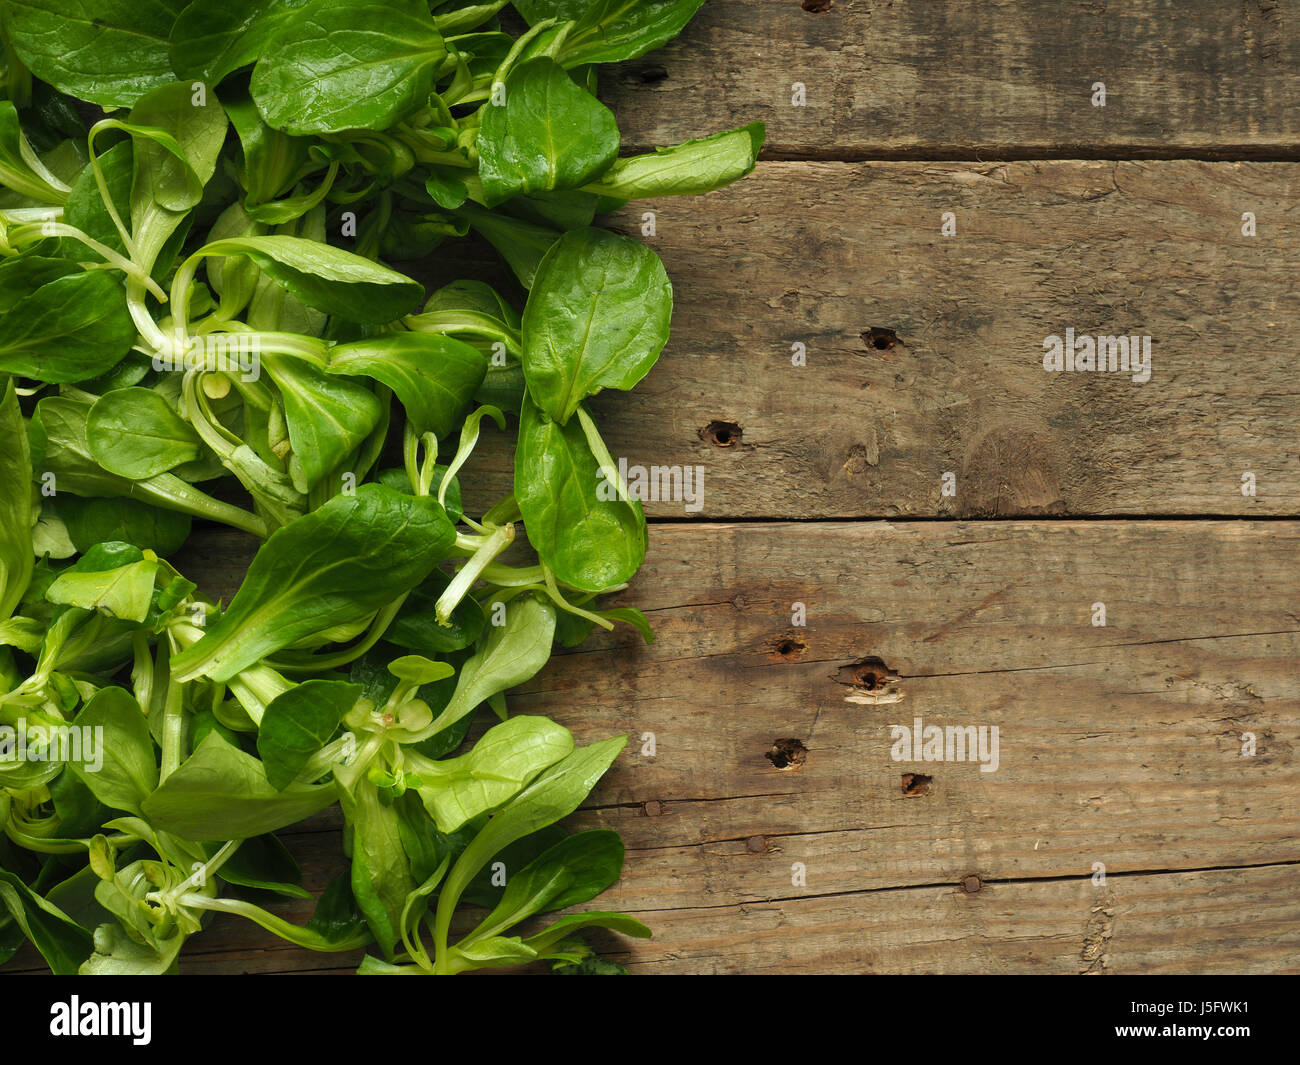 Lambs Lettuce On An Old Rustic Wooden Kitchen Table With Space For Text